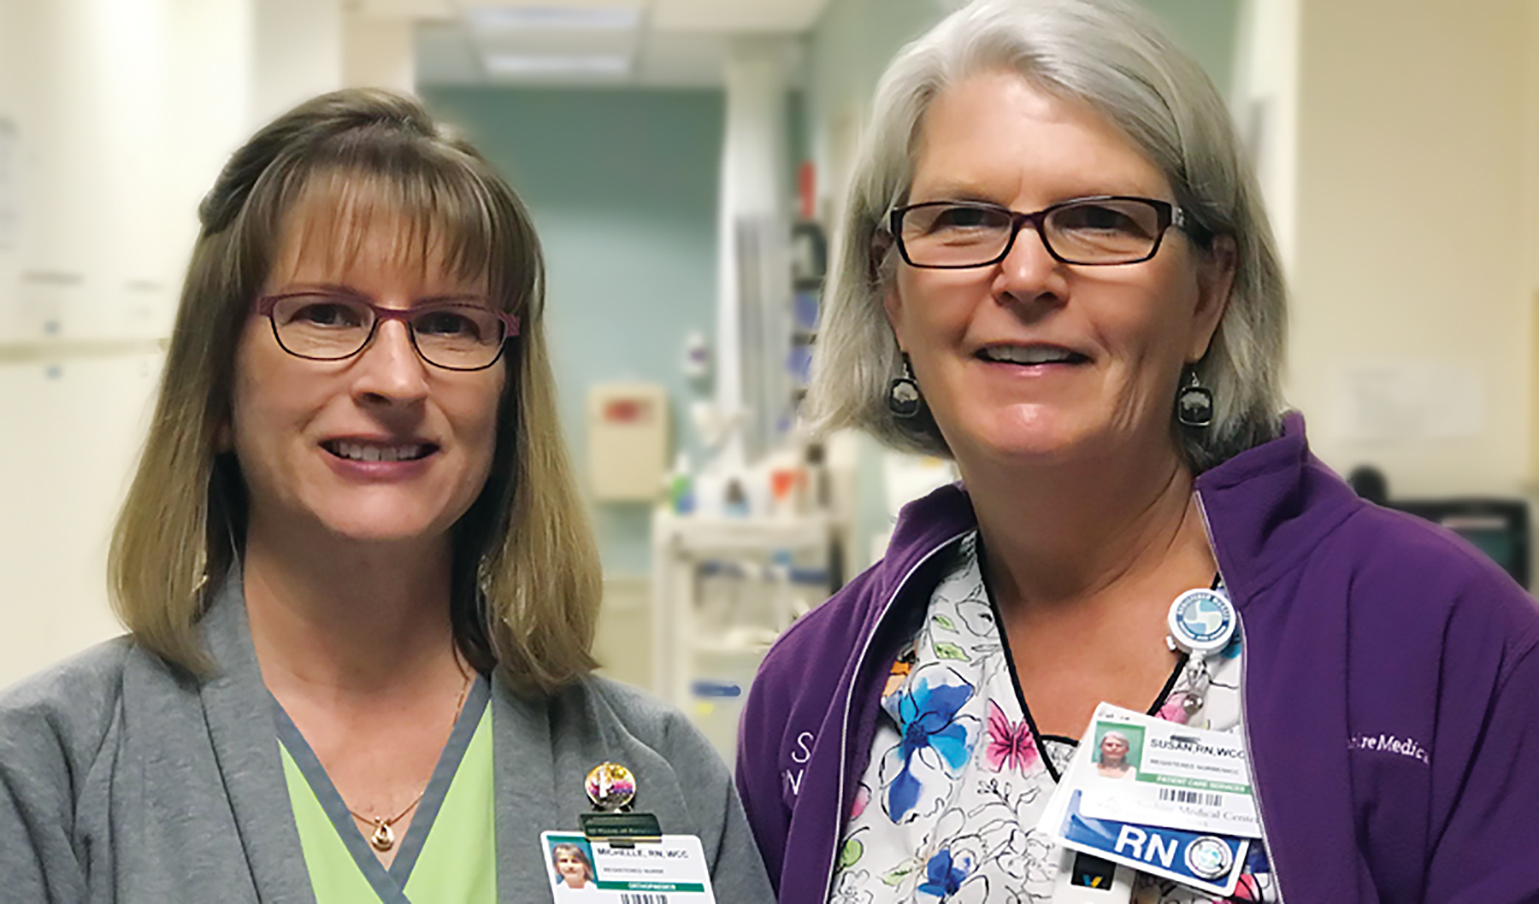 Wound care nurses at Cheshire Medical Center